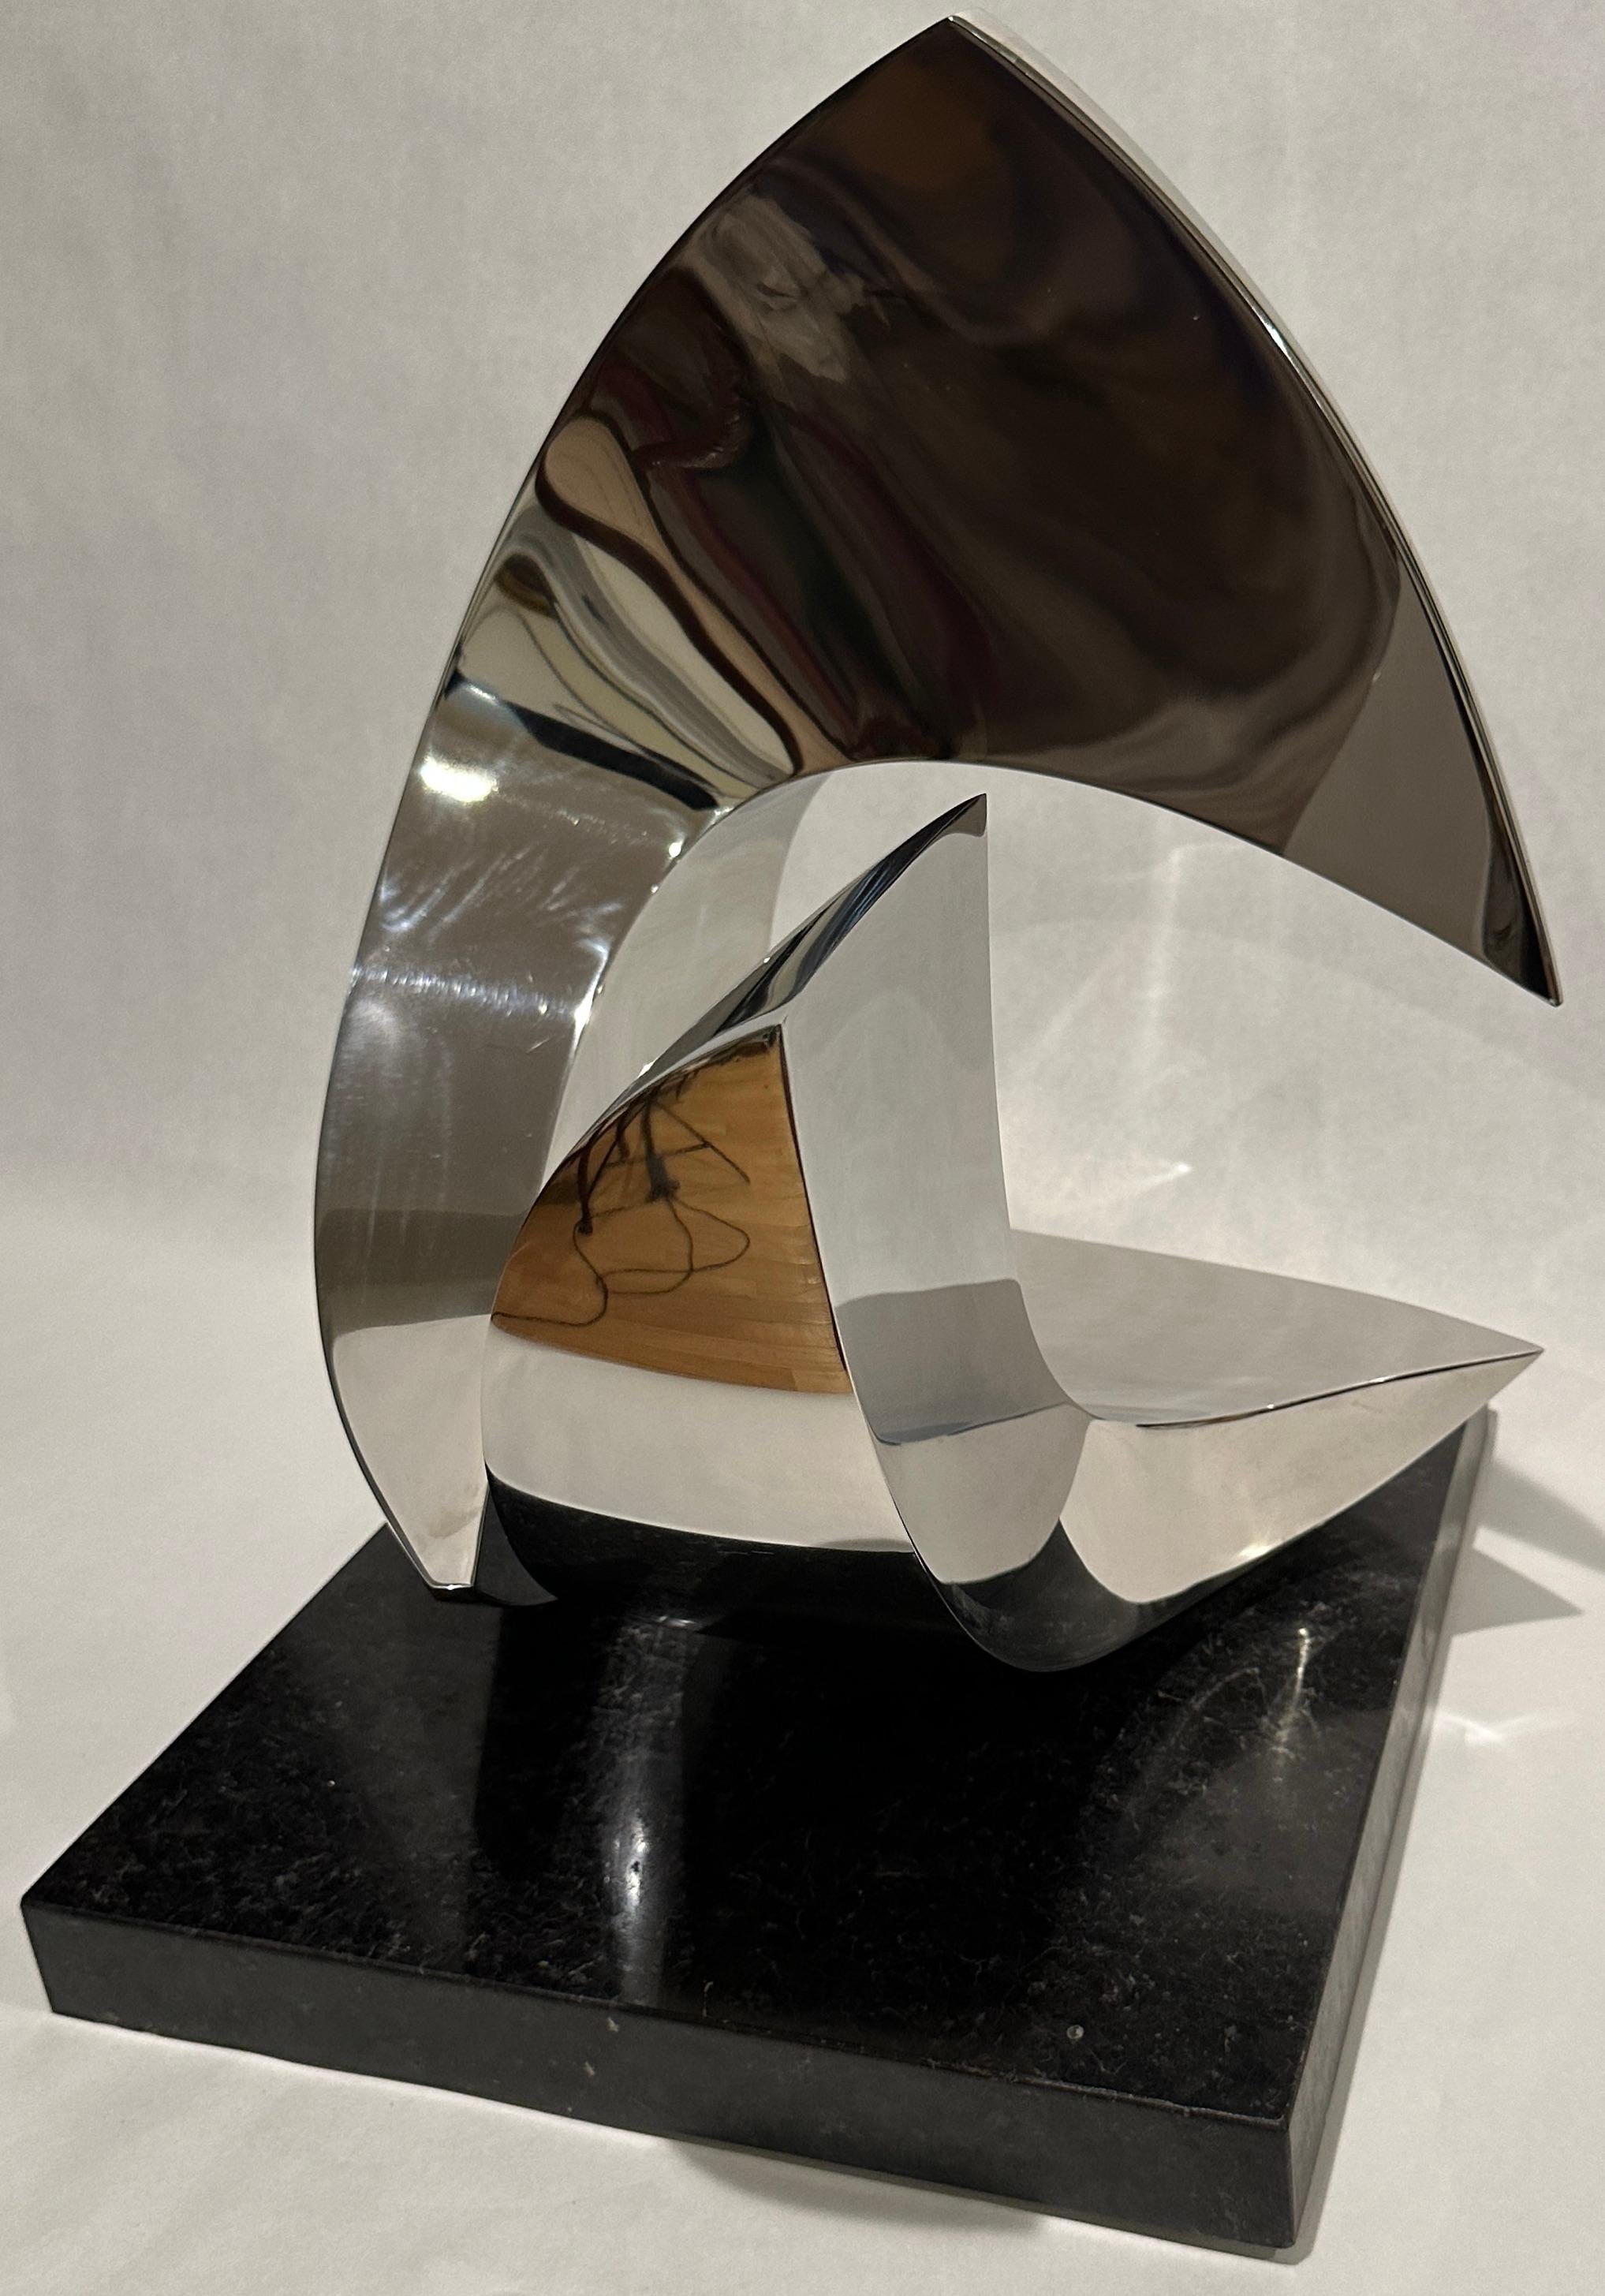 Polished stainless steel abstract sculpture, 